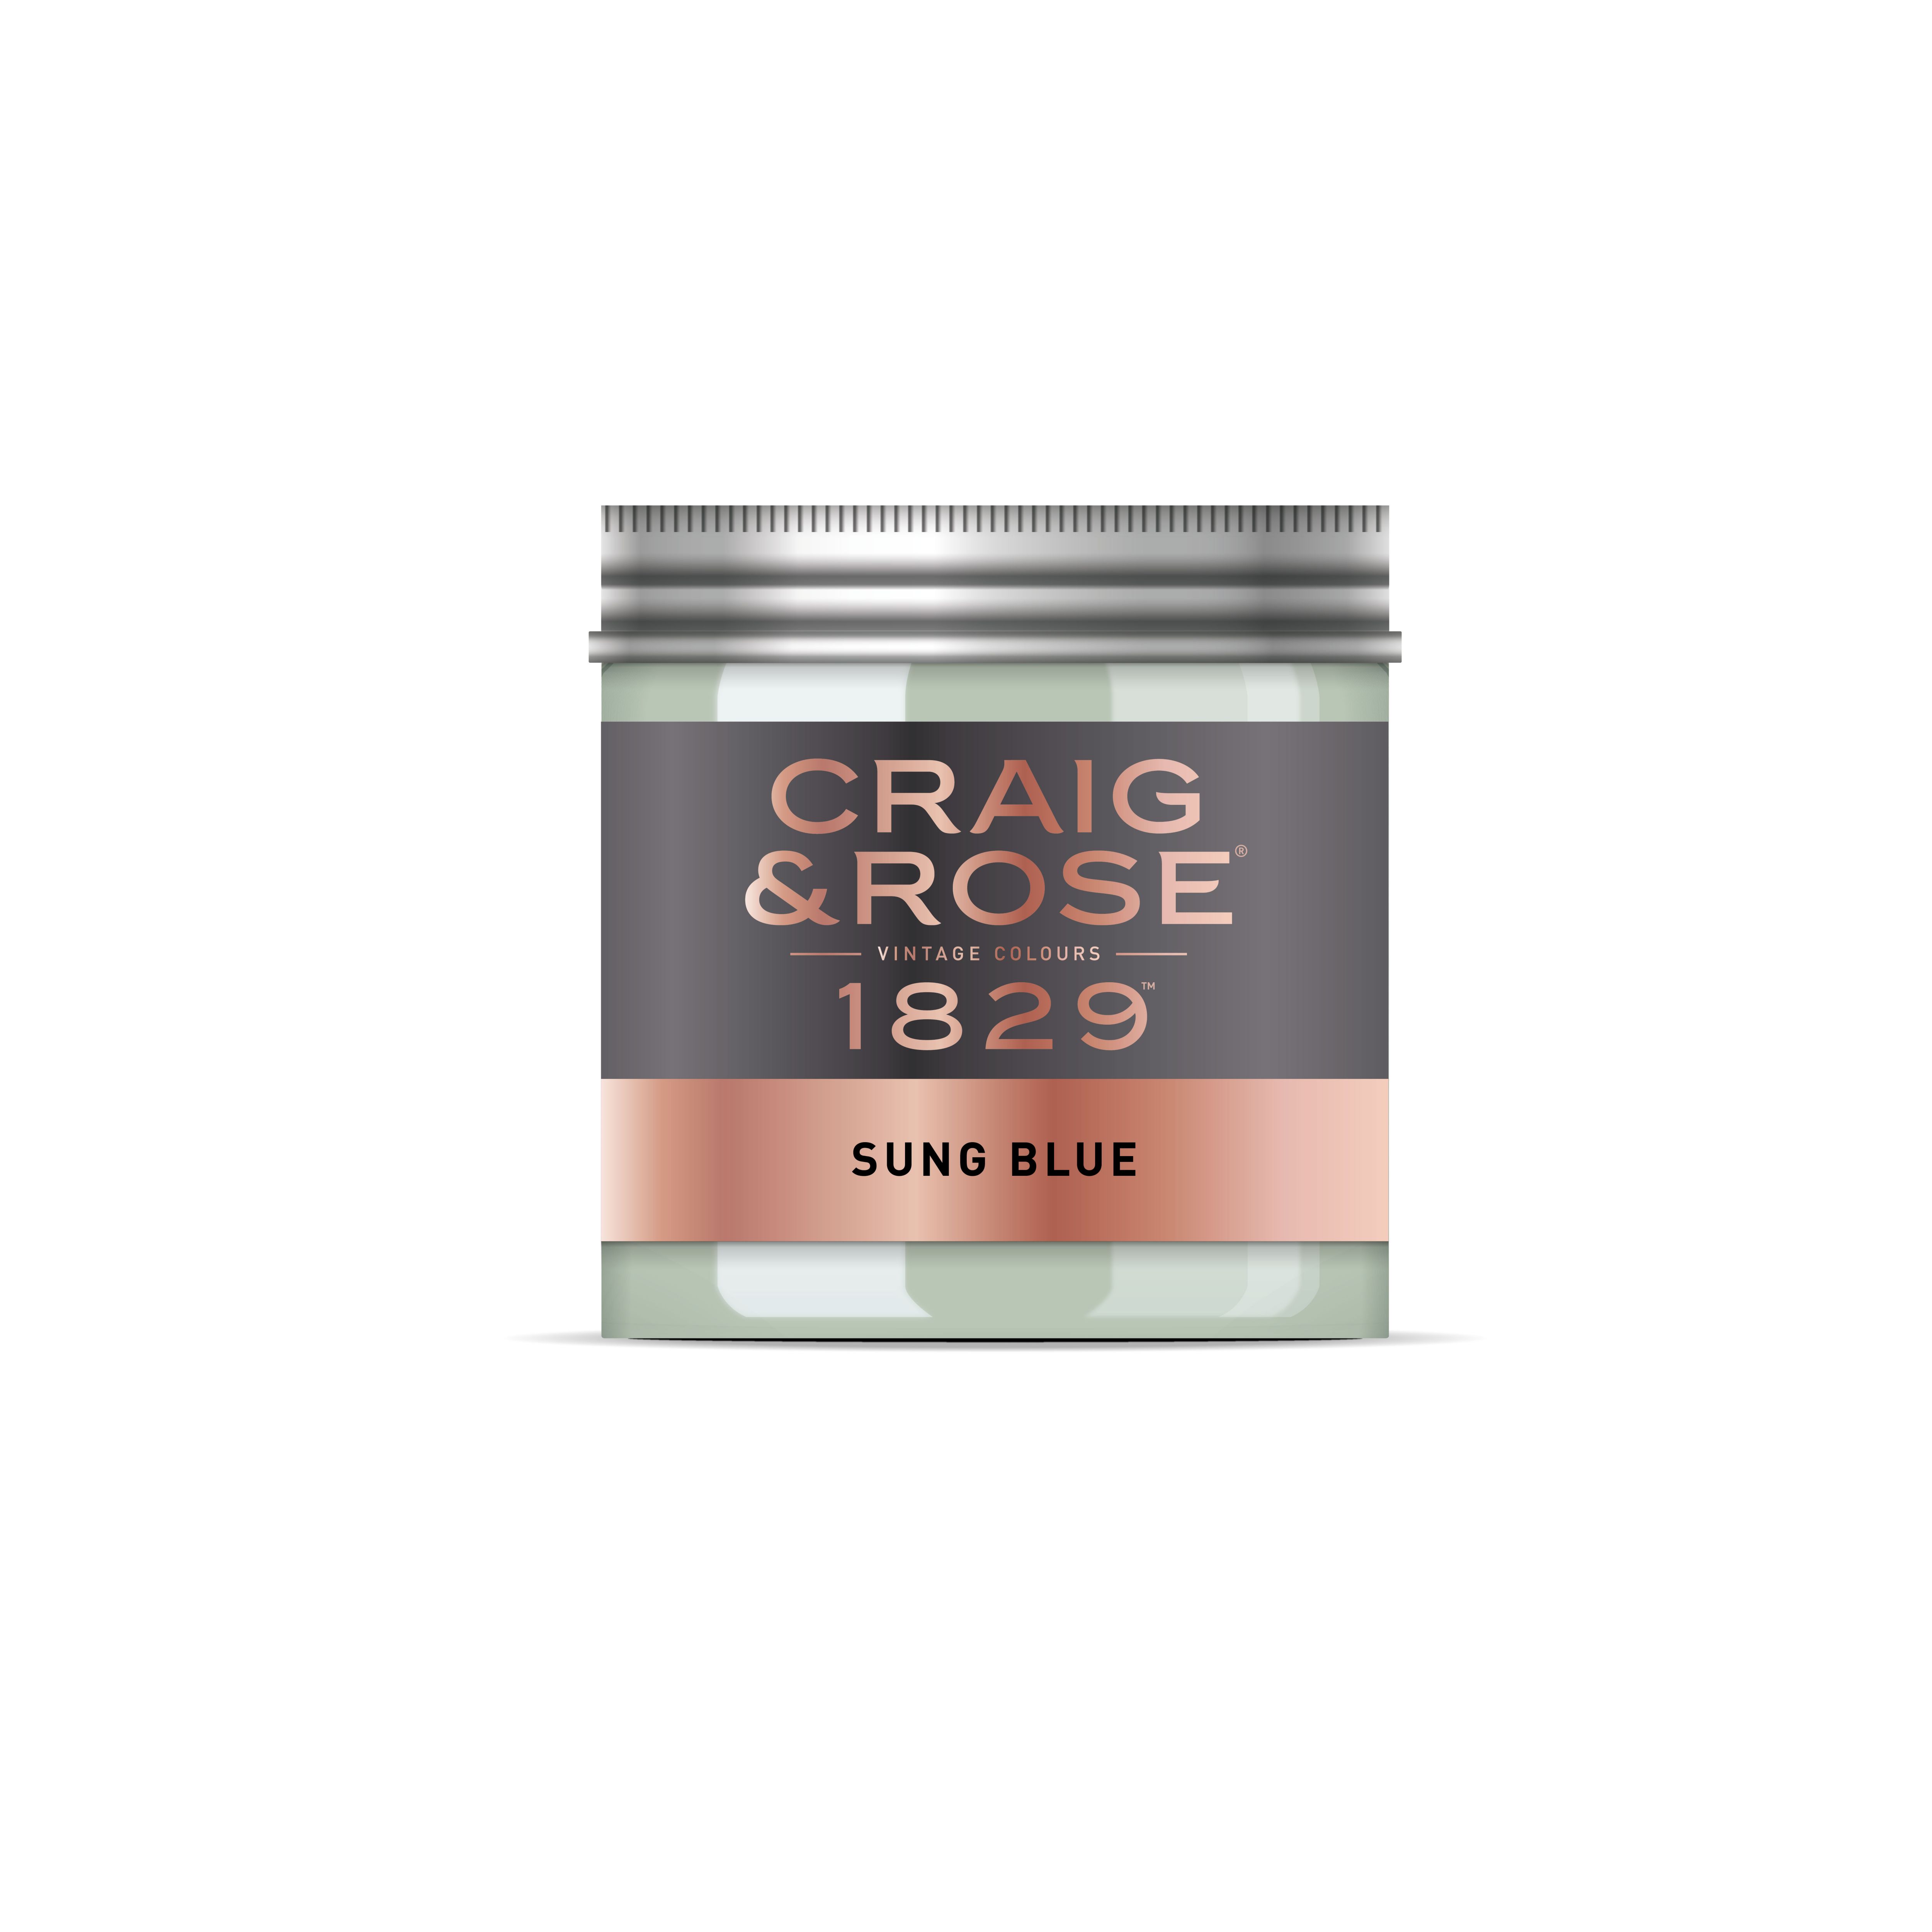 Craig & Rose 1829 Sung Blue Chalky Emulsion paint, 50ml